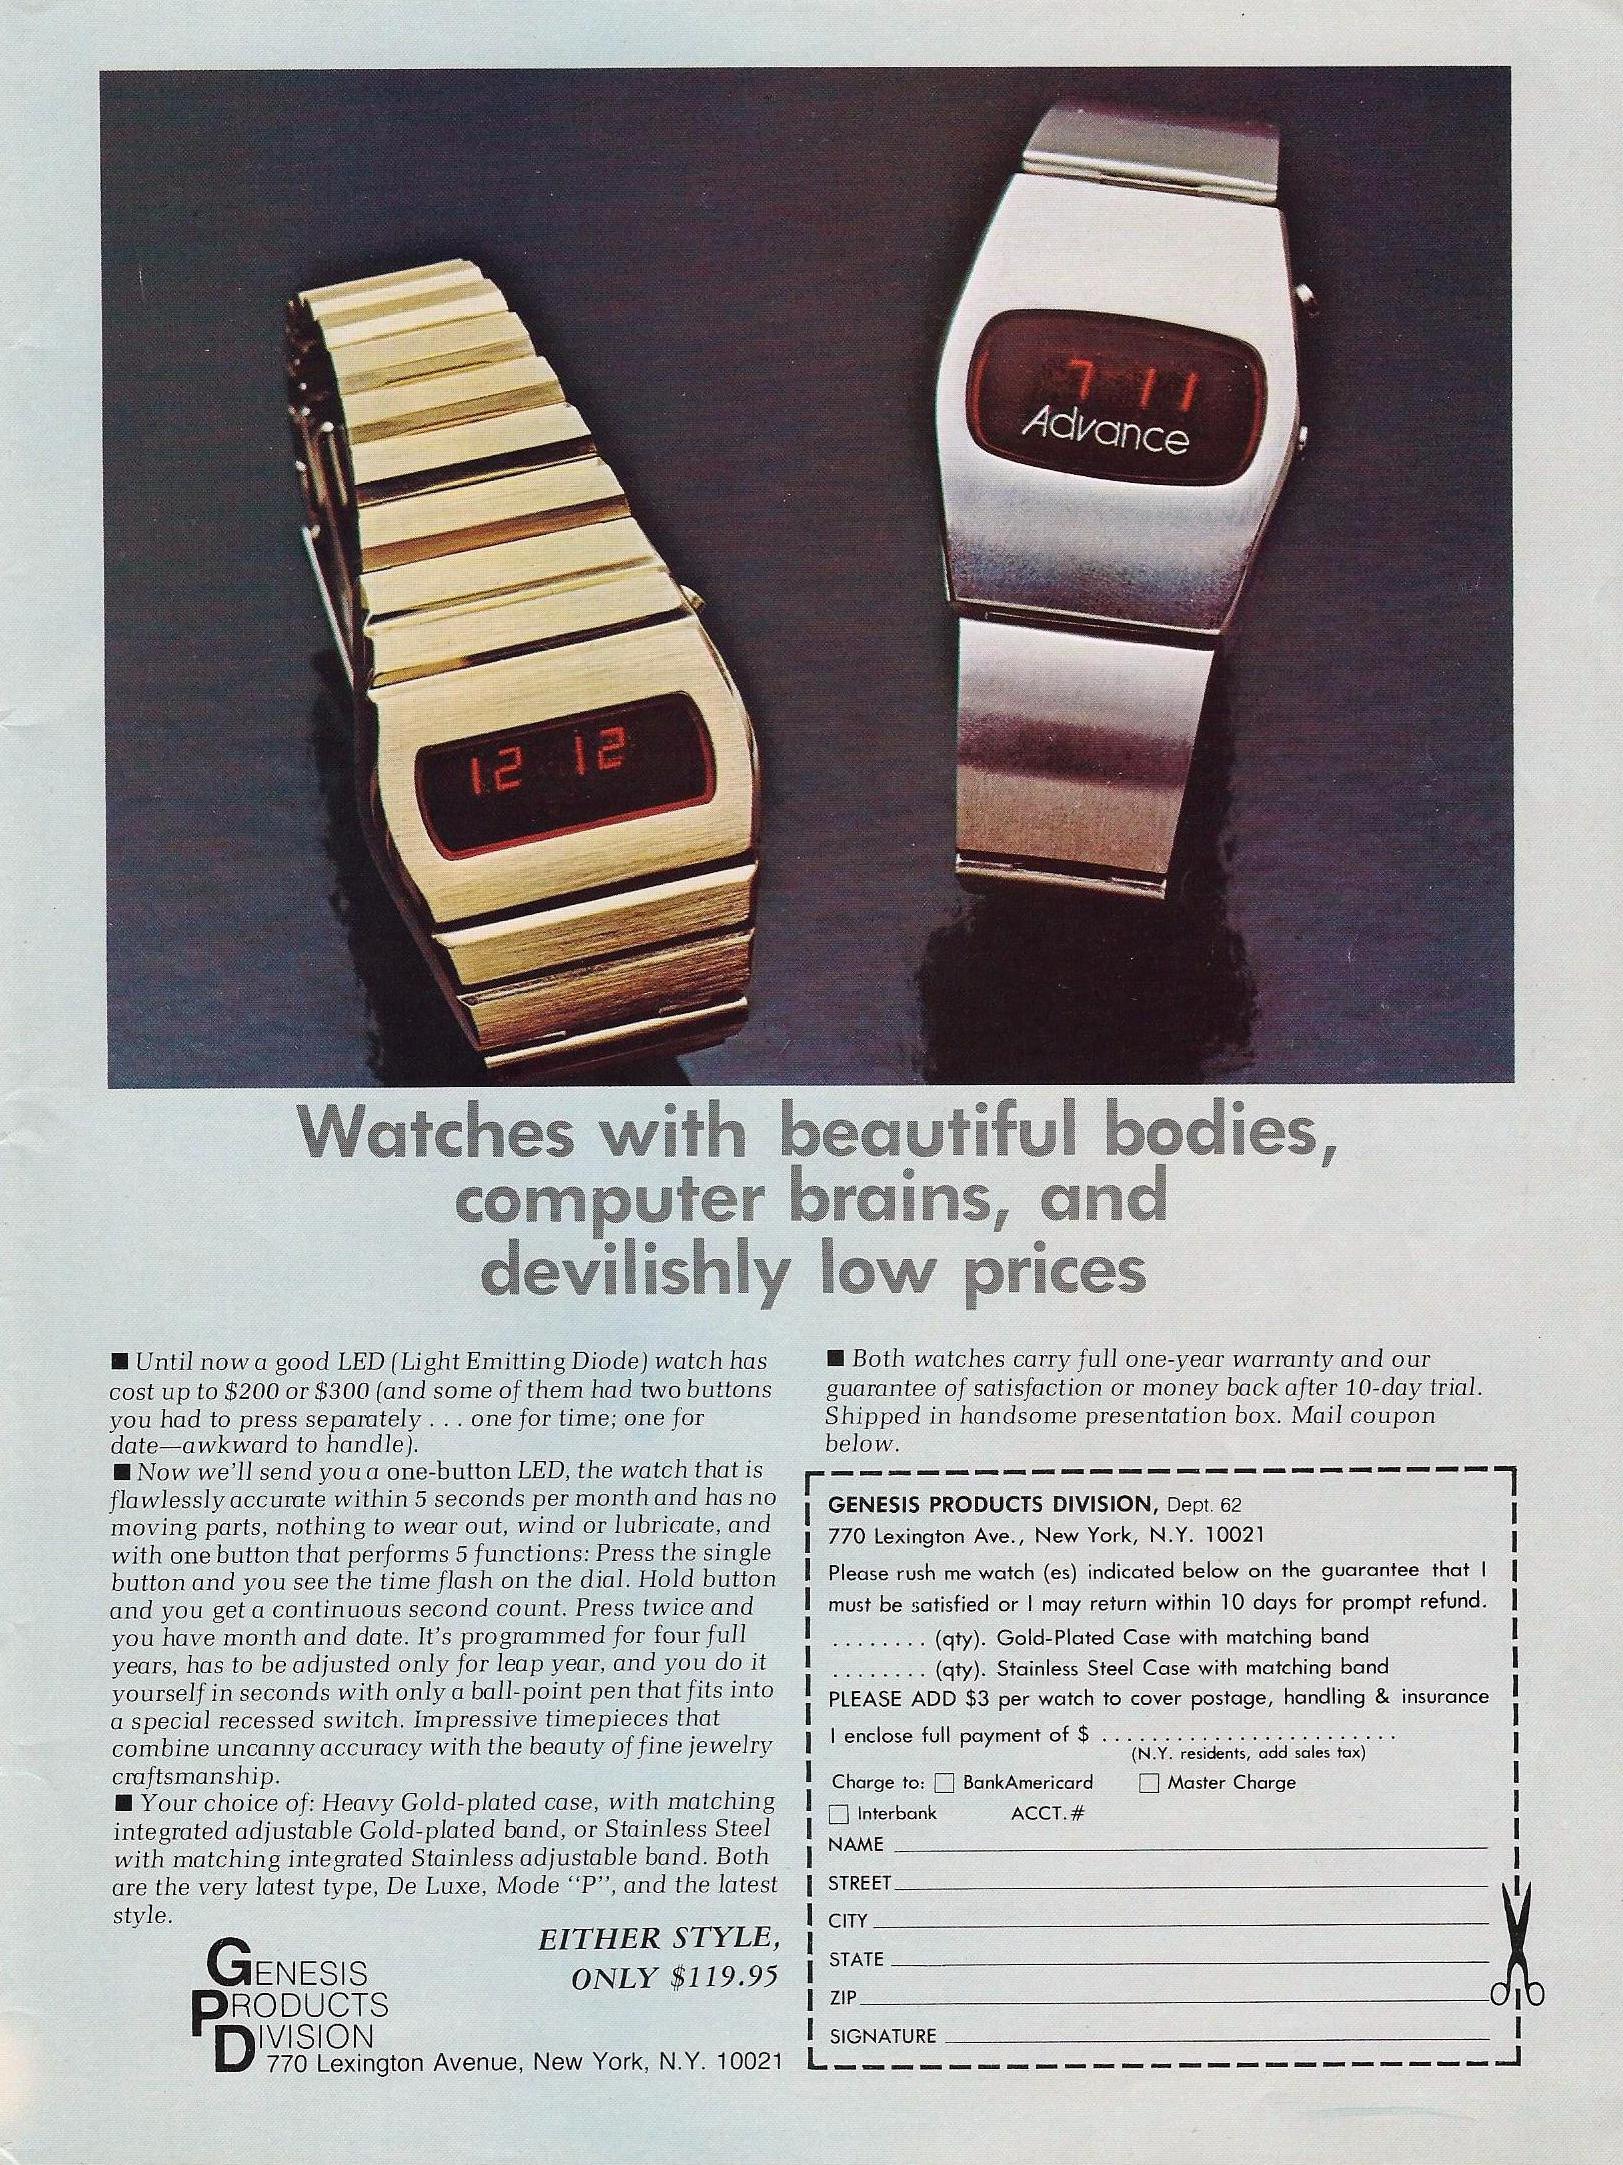 1970s_Advertising_for_Vintage_Electronic_LED_Watches_with_Red_Dials%2C_From_Genesis_Products_Division%2C_Genesis_Magazine_%2810537307225%29.jpg